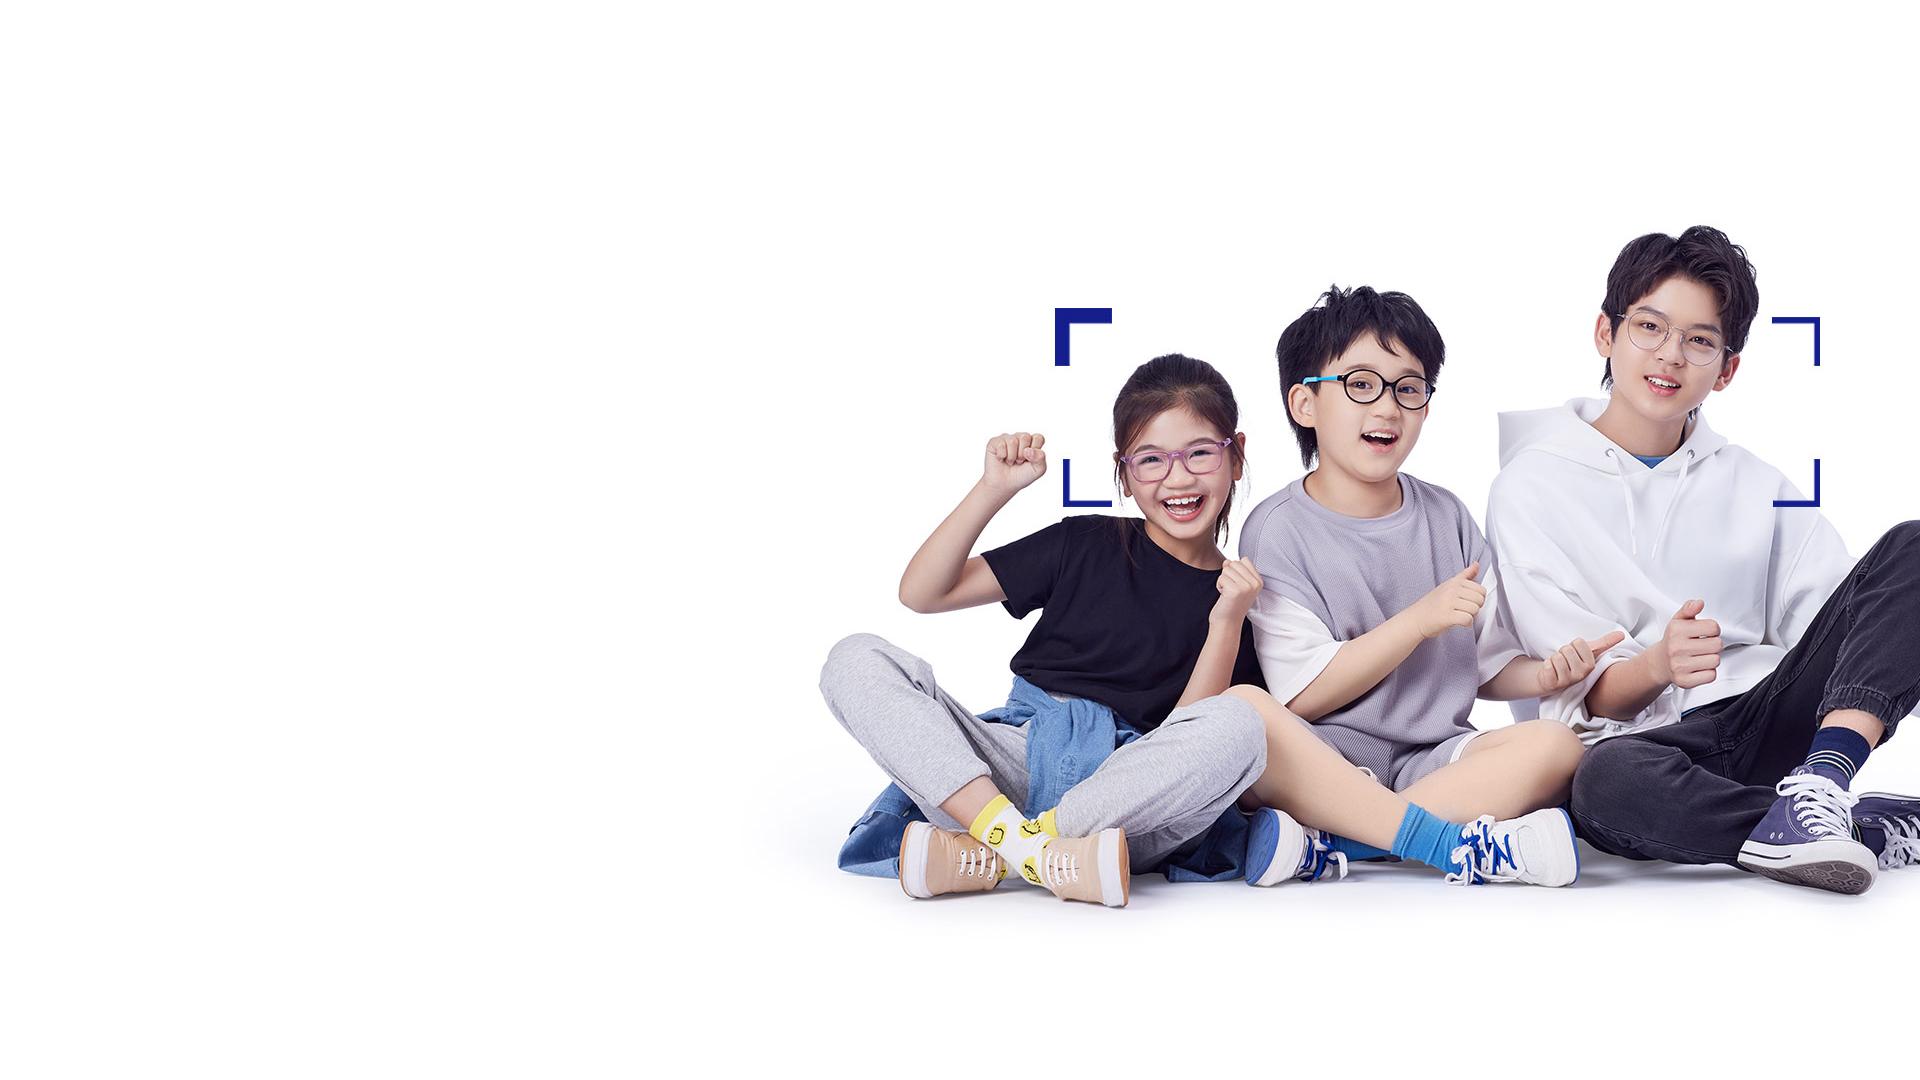 Two boys and a girl with glasses sitting next to each other laughing and giving thumbs up.